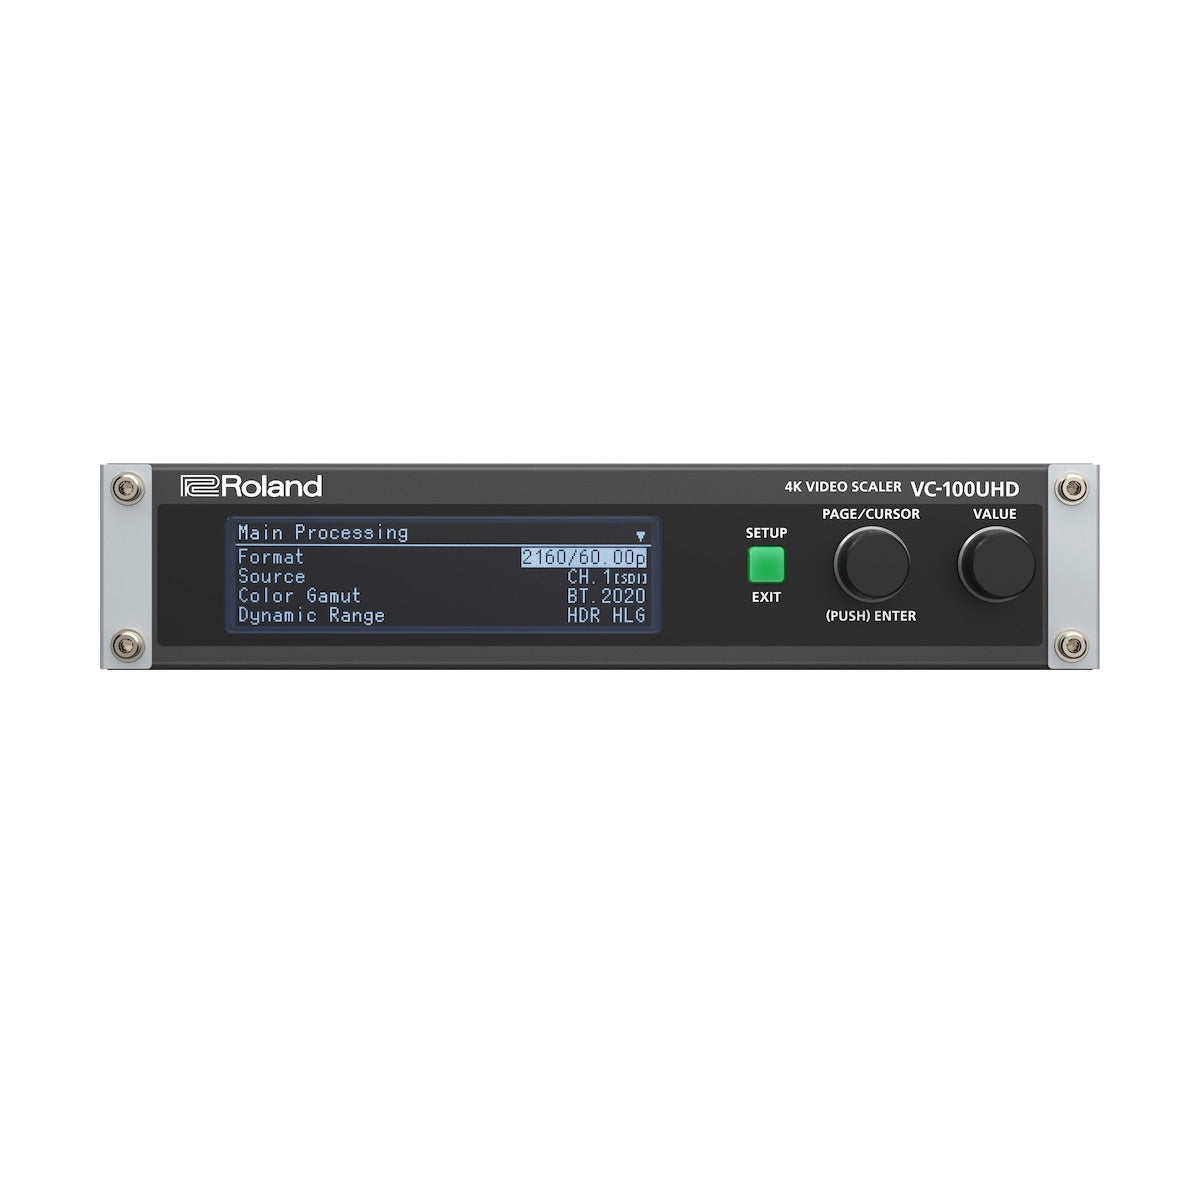 Roland VC-100UHD - 4K Video Scaler, Converter, and Streamer, front